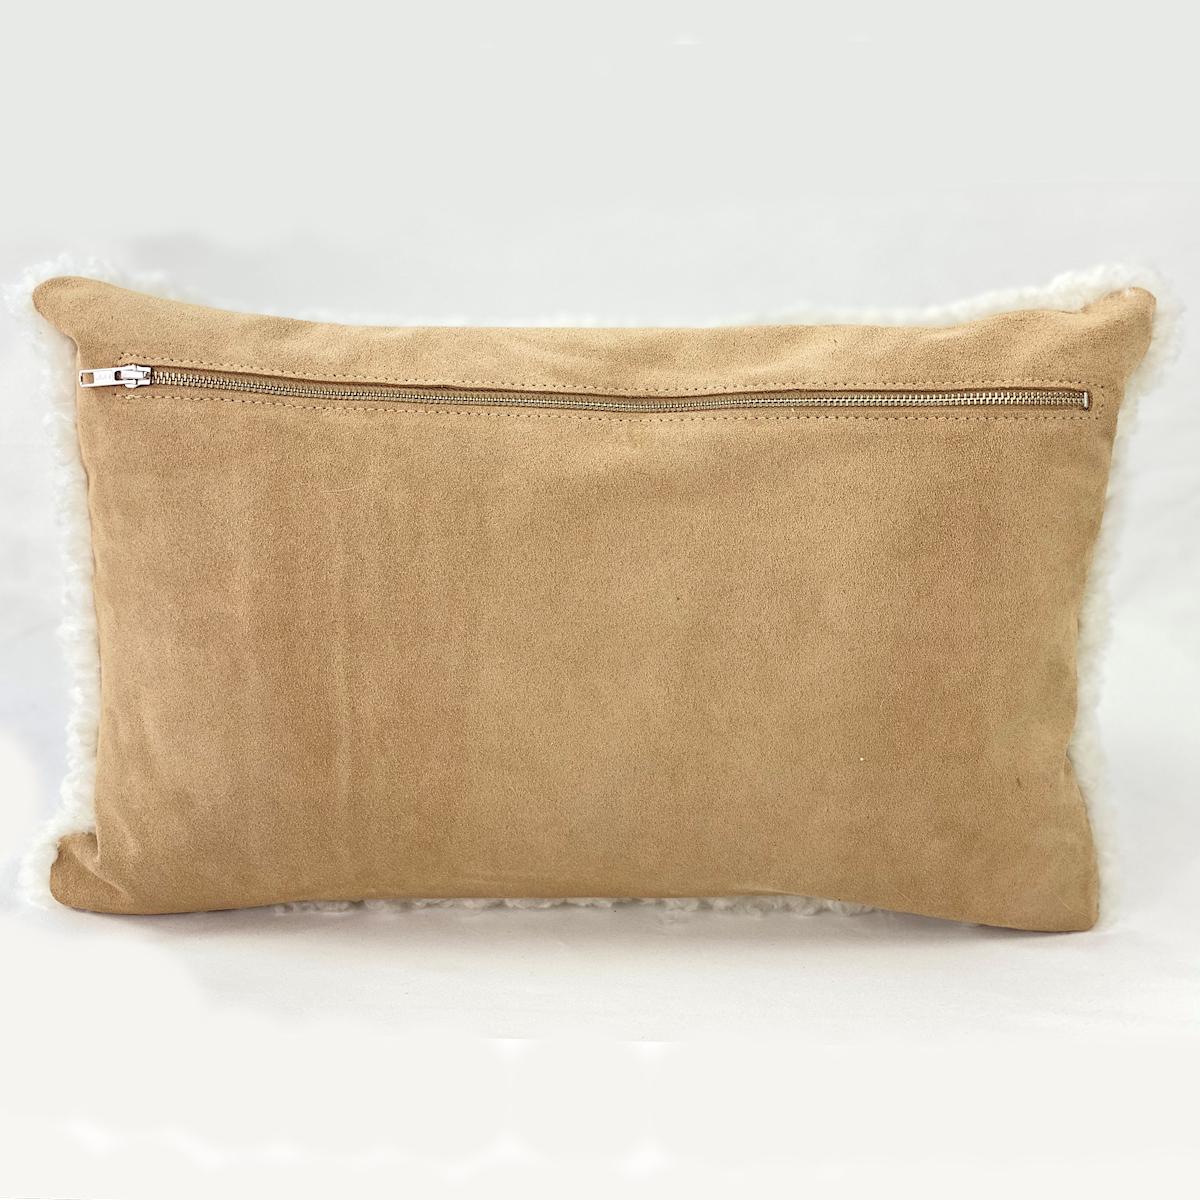 Transform a bed, sofa or arm chair with this endearing sheepskin shearling  pillow. The natural white sheepskin wool features a short and curly wool pile that will add will elevate charm and style to a room. Part of the boucle collection, this